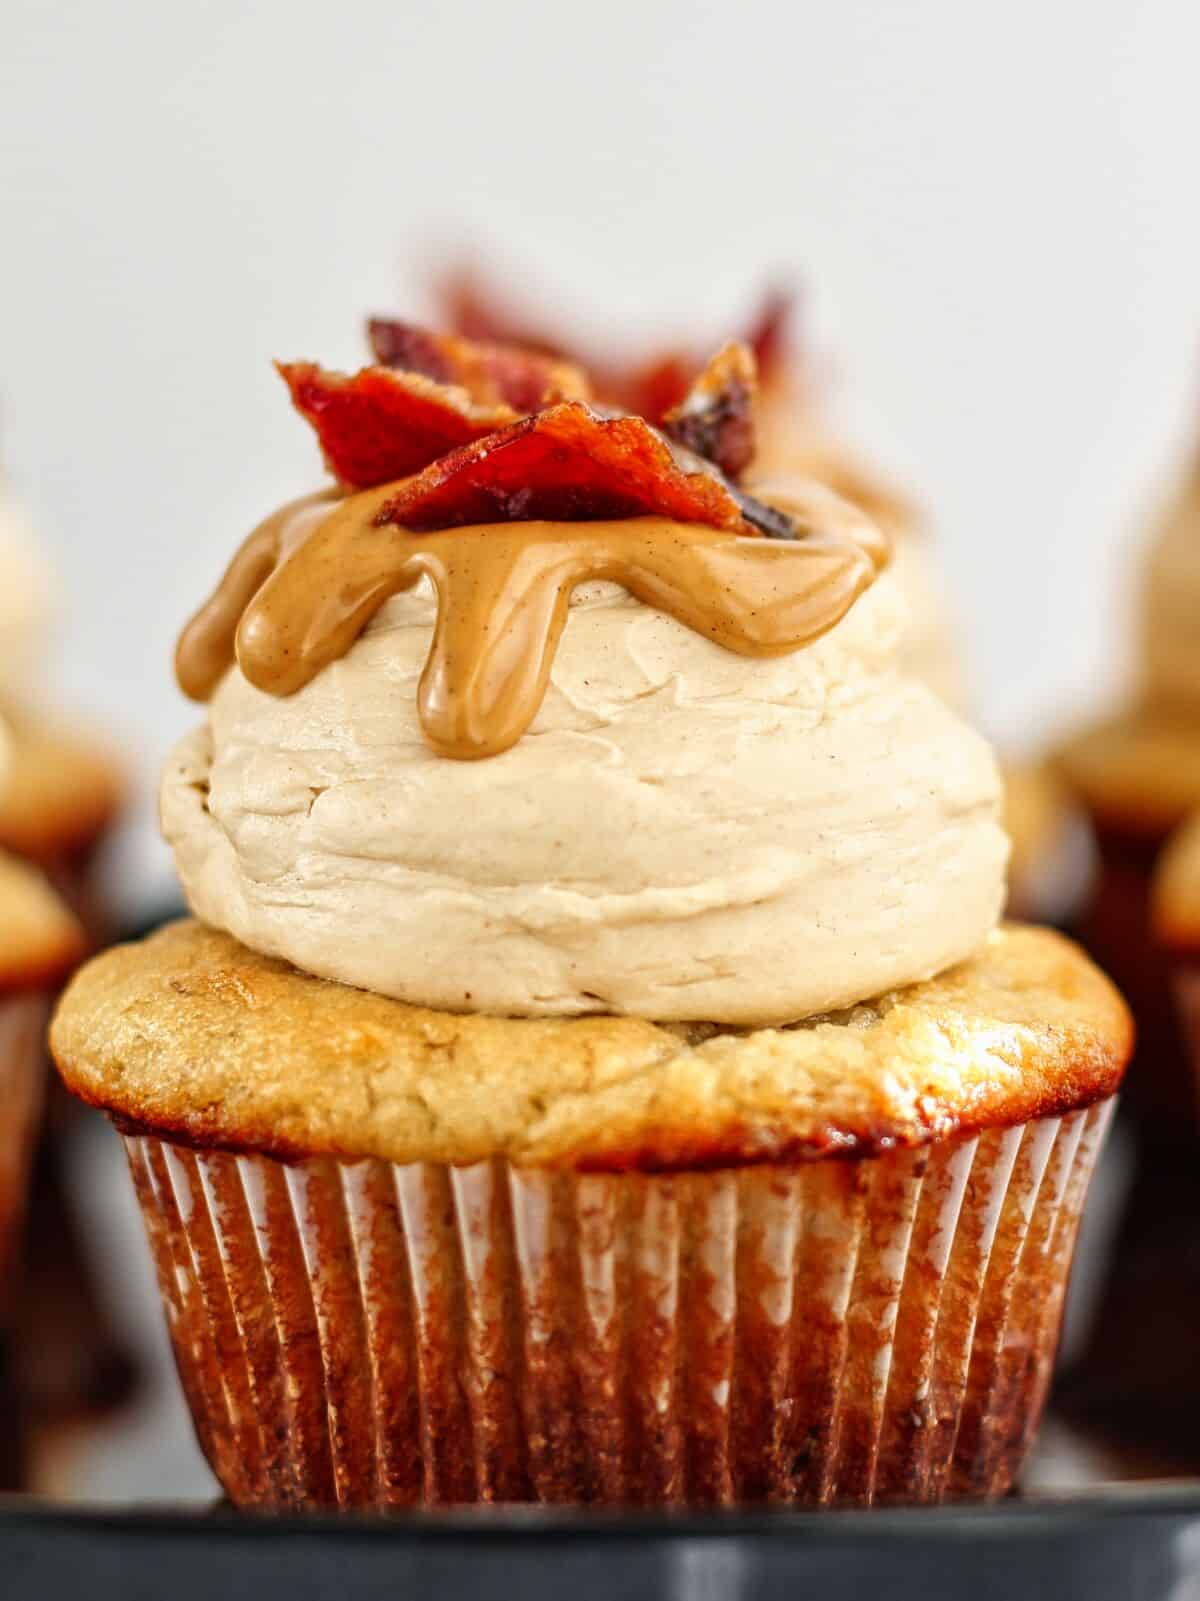 Gluten Free Banana Cupcakes with Peanut Butter and Candied Bacon